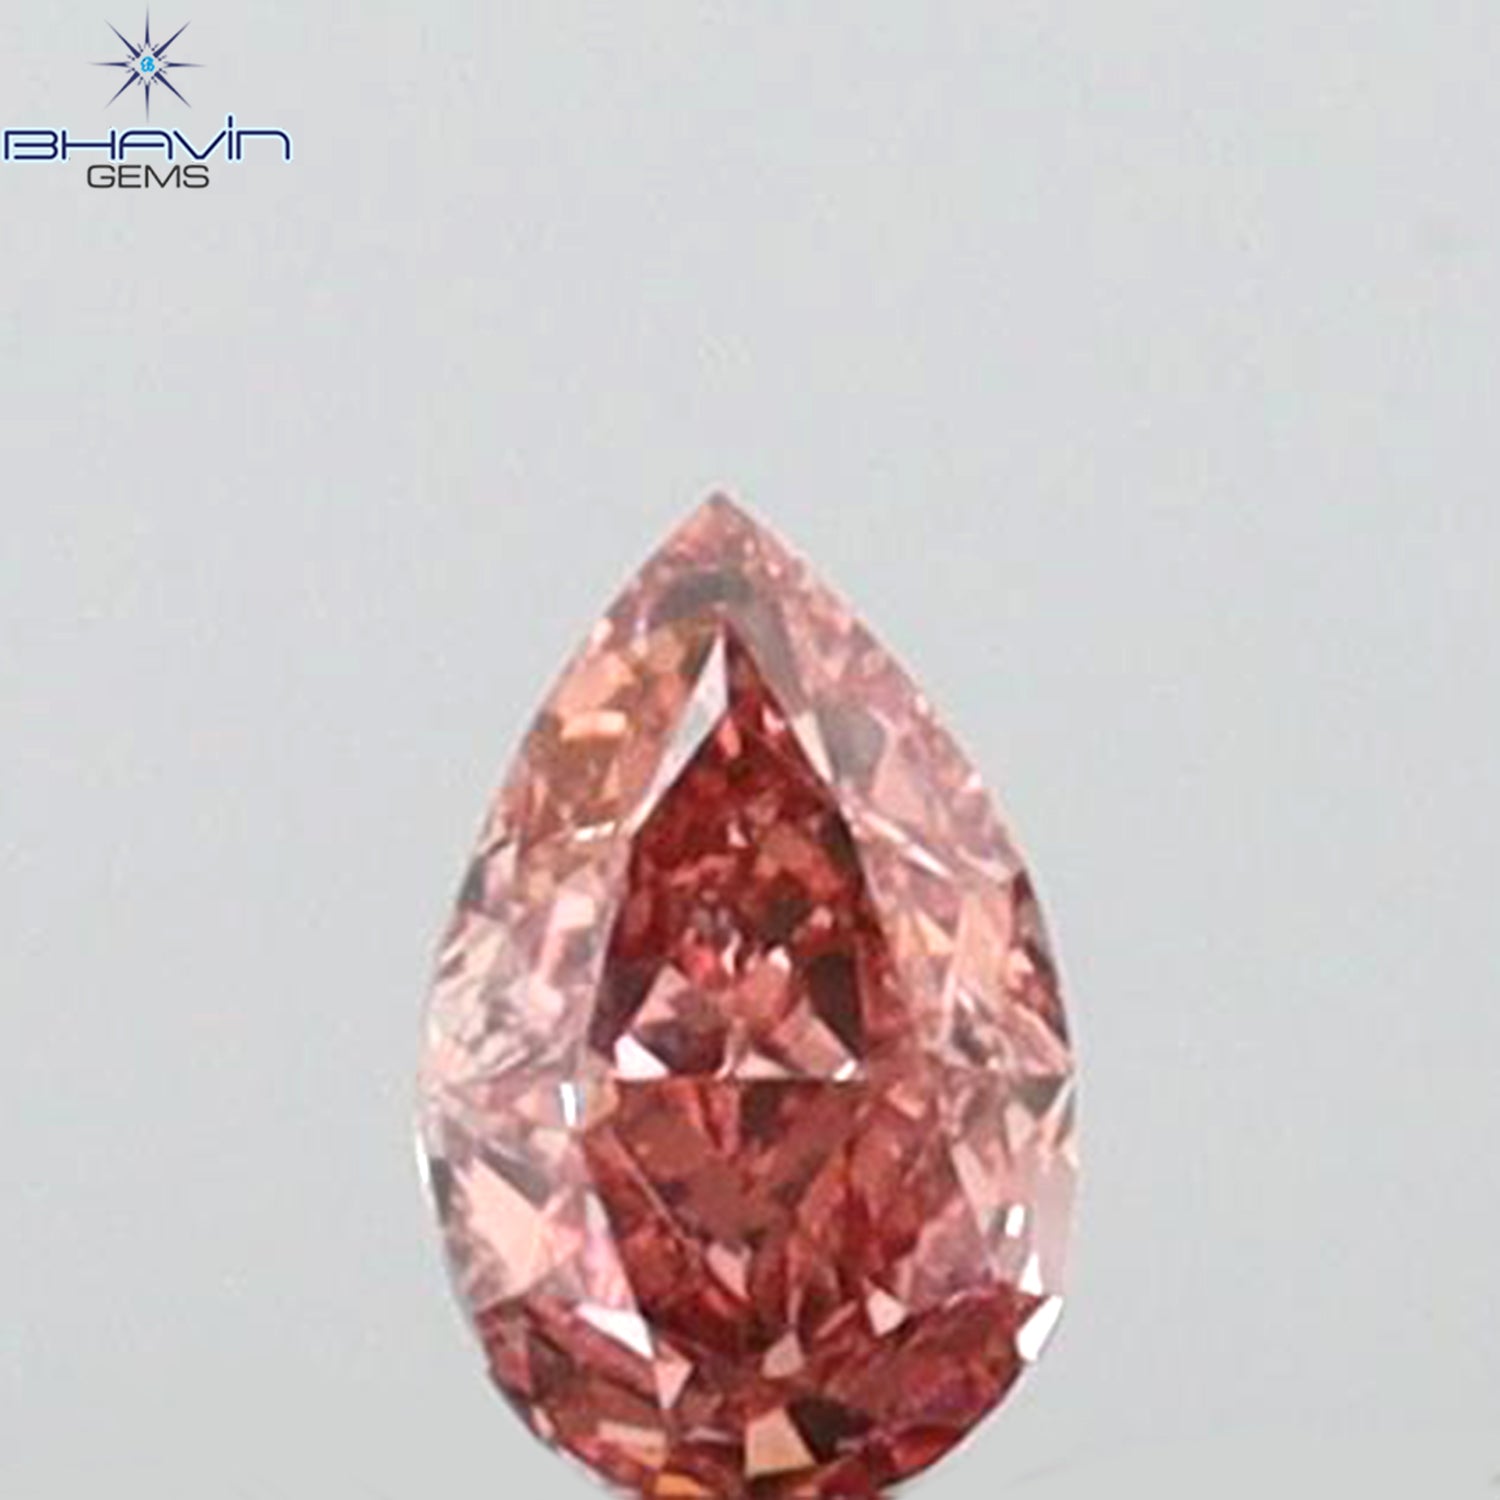 0.06 CT Pear Shape Natural Diamond Pink Color VS2 Clarity (3.14 MM)